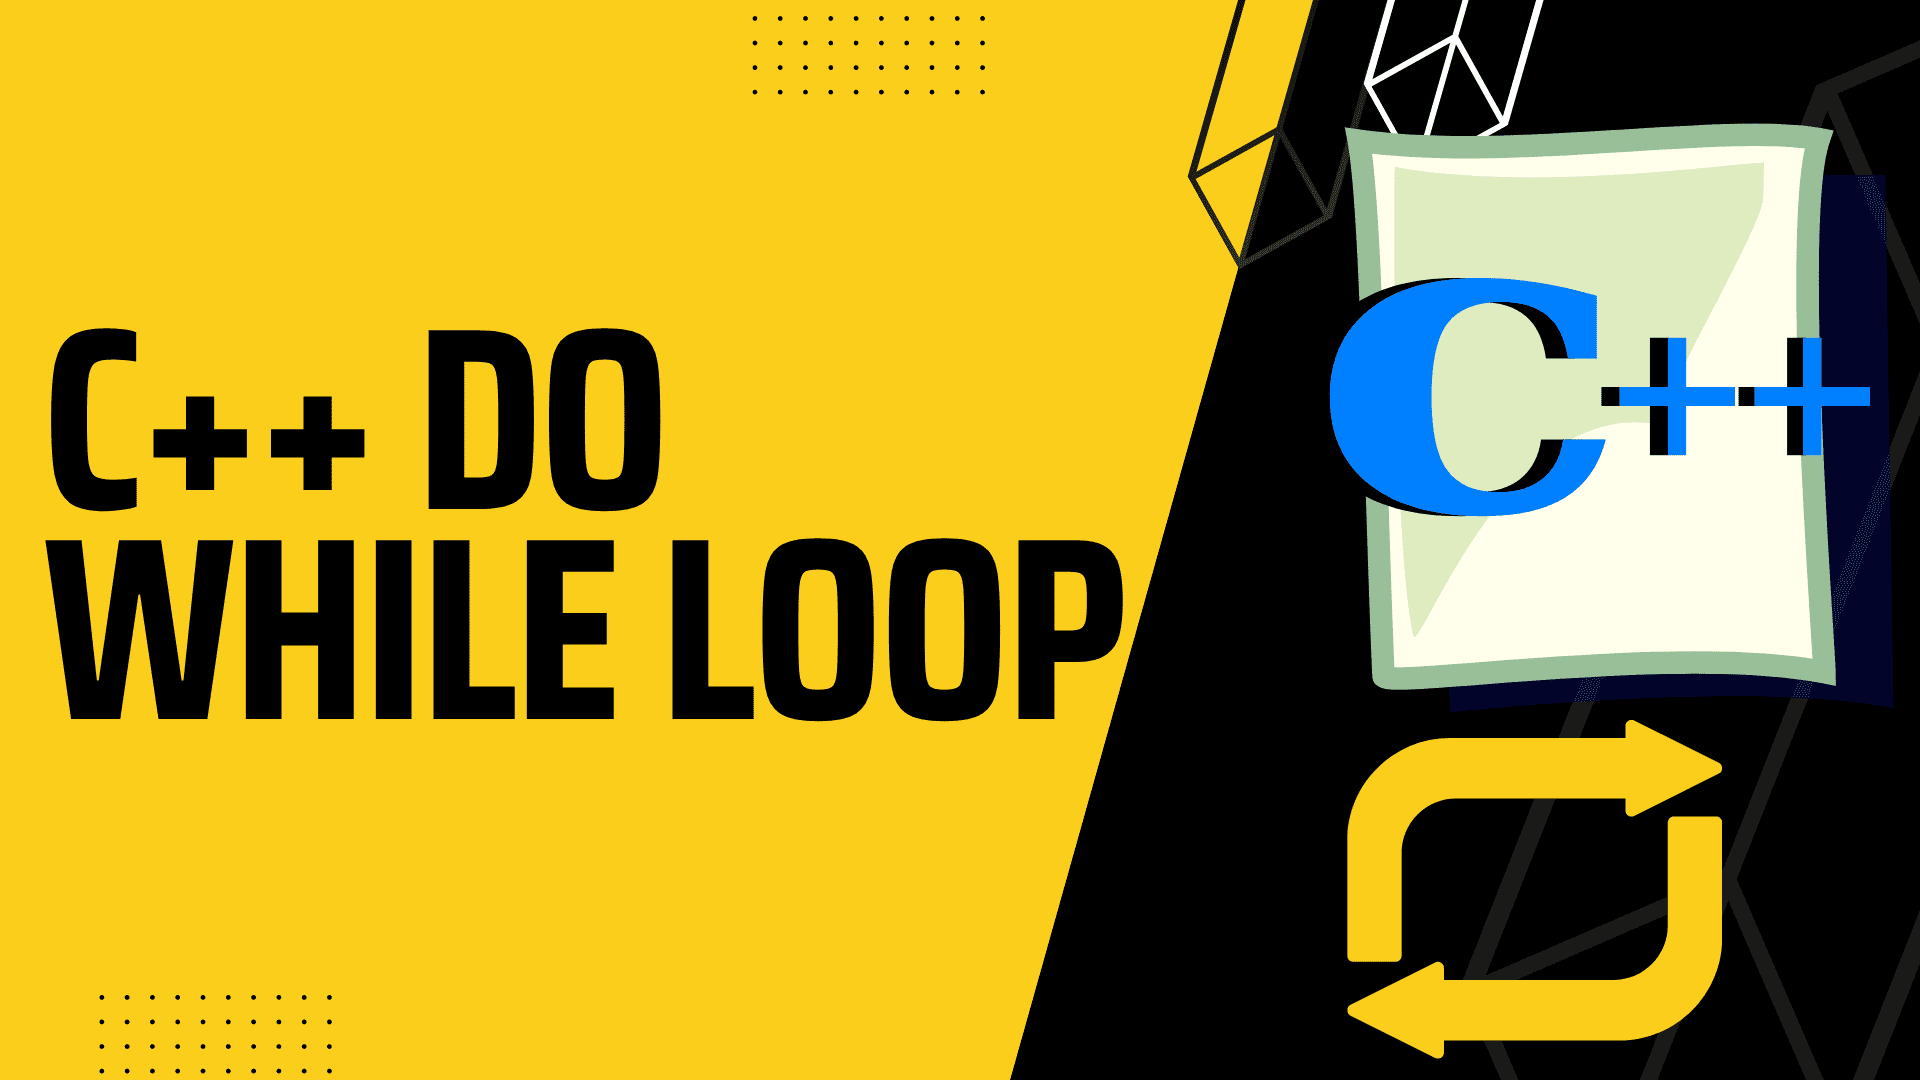 C++ do while loop